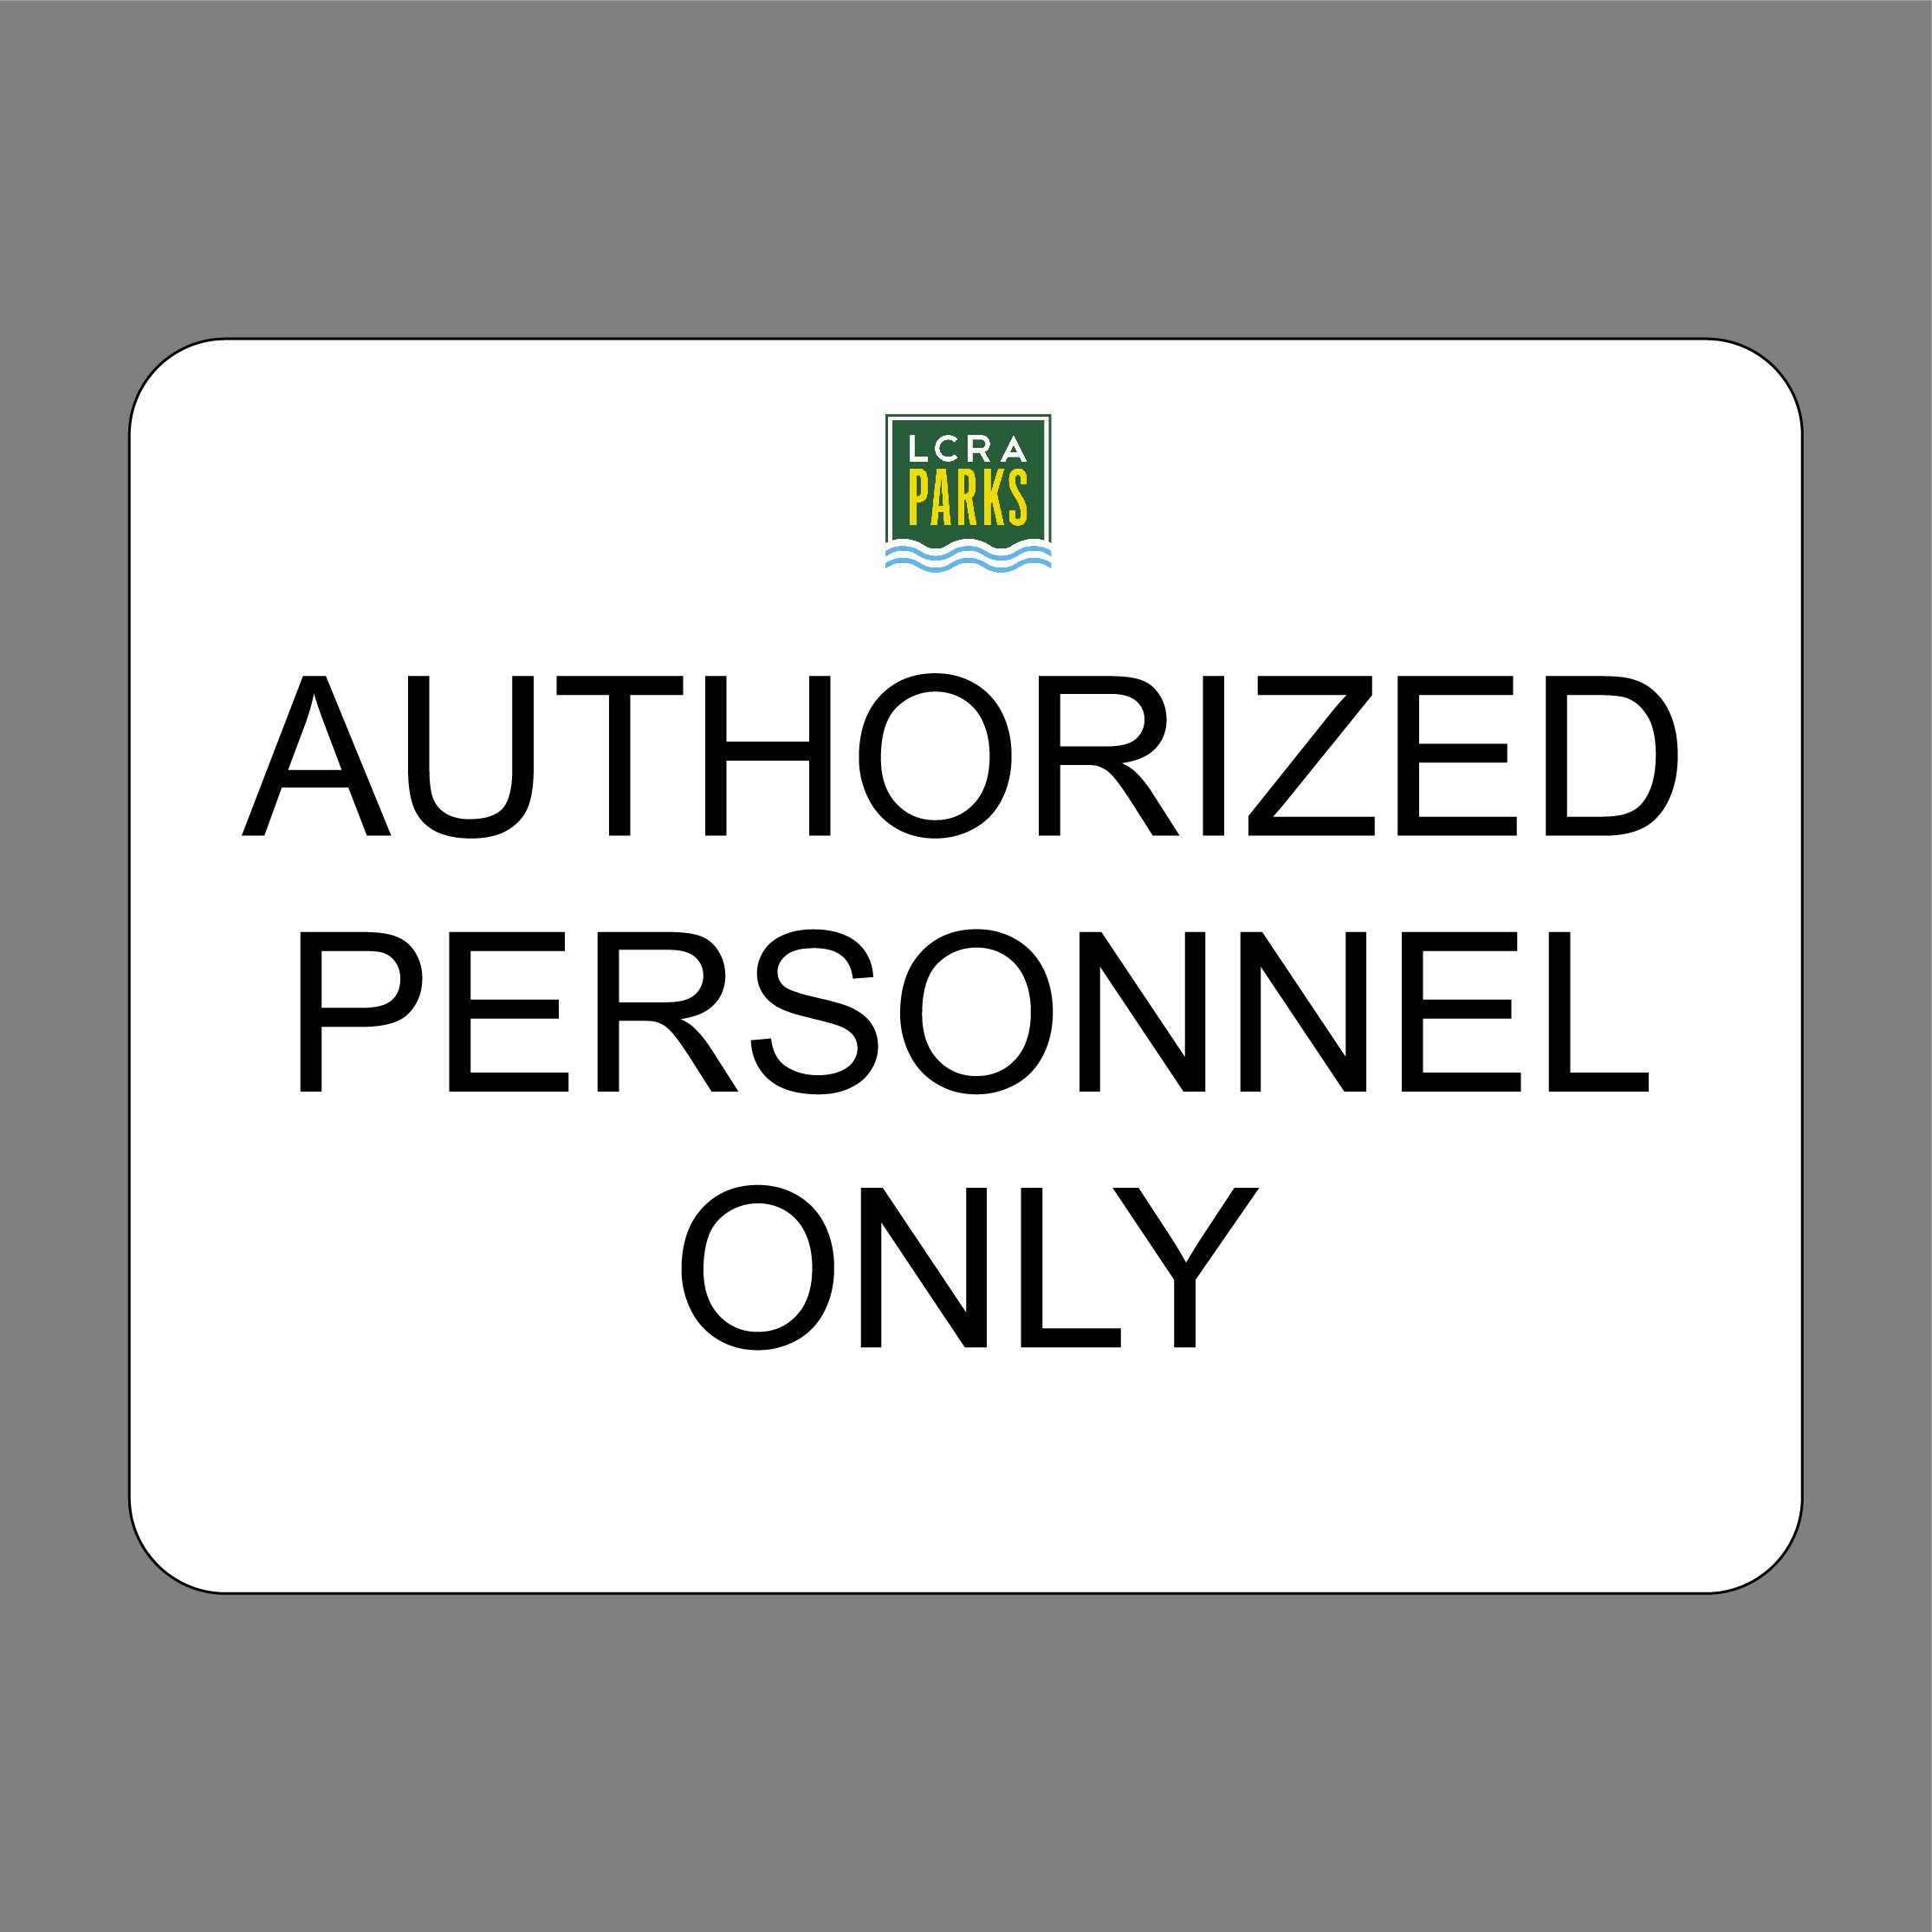 LCRA Authorized Personnel Only Product Image